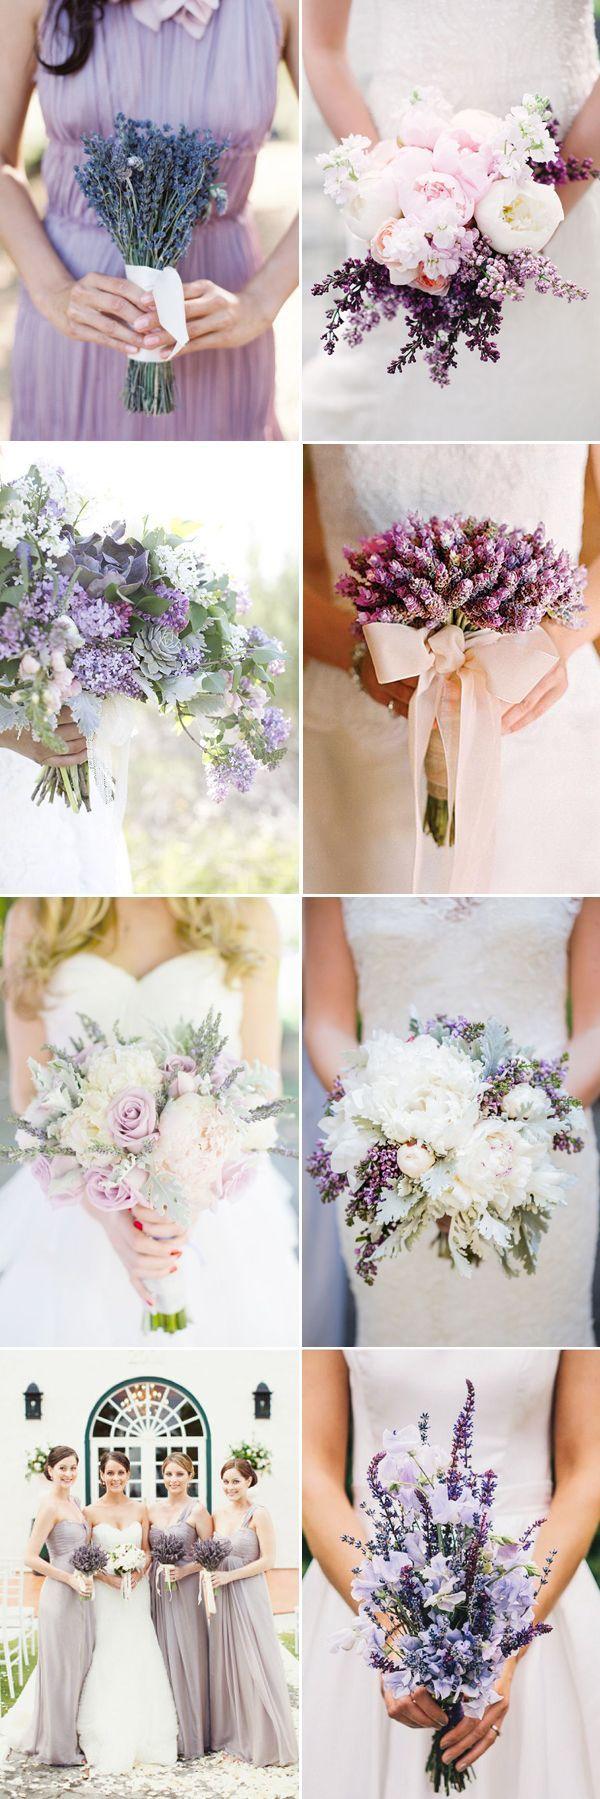 Wedding - 45 Romantic Ways To Decorate Your Wedding With Lavender